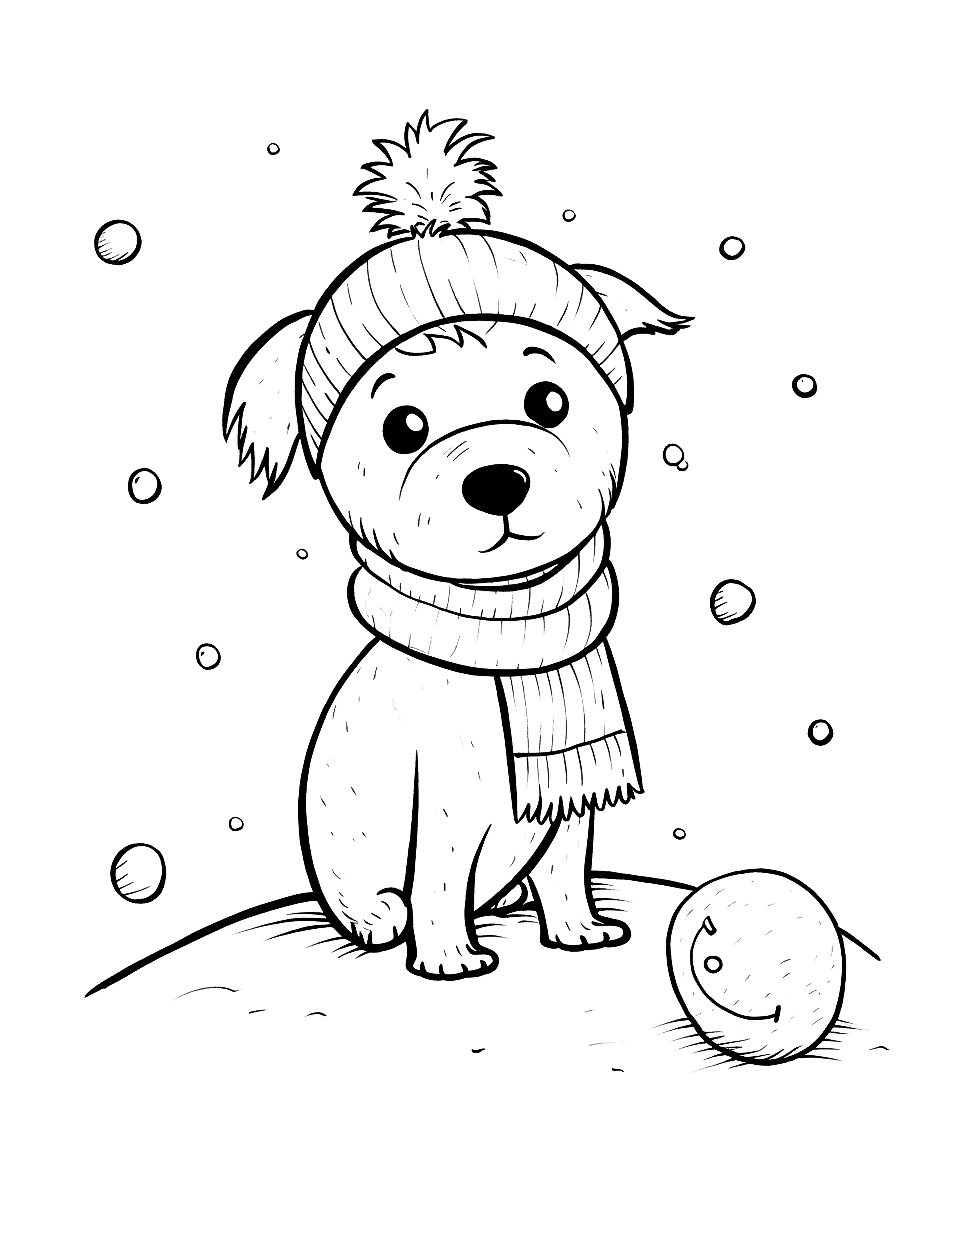 Cute Winter Dog Coloring Page - A lovable dog playing with a snowball.